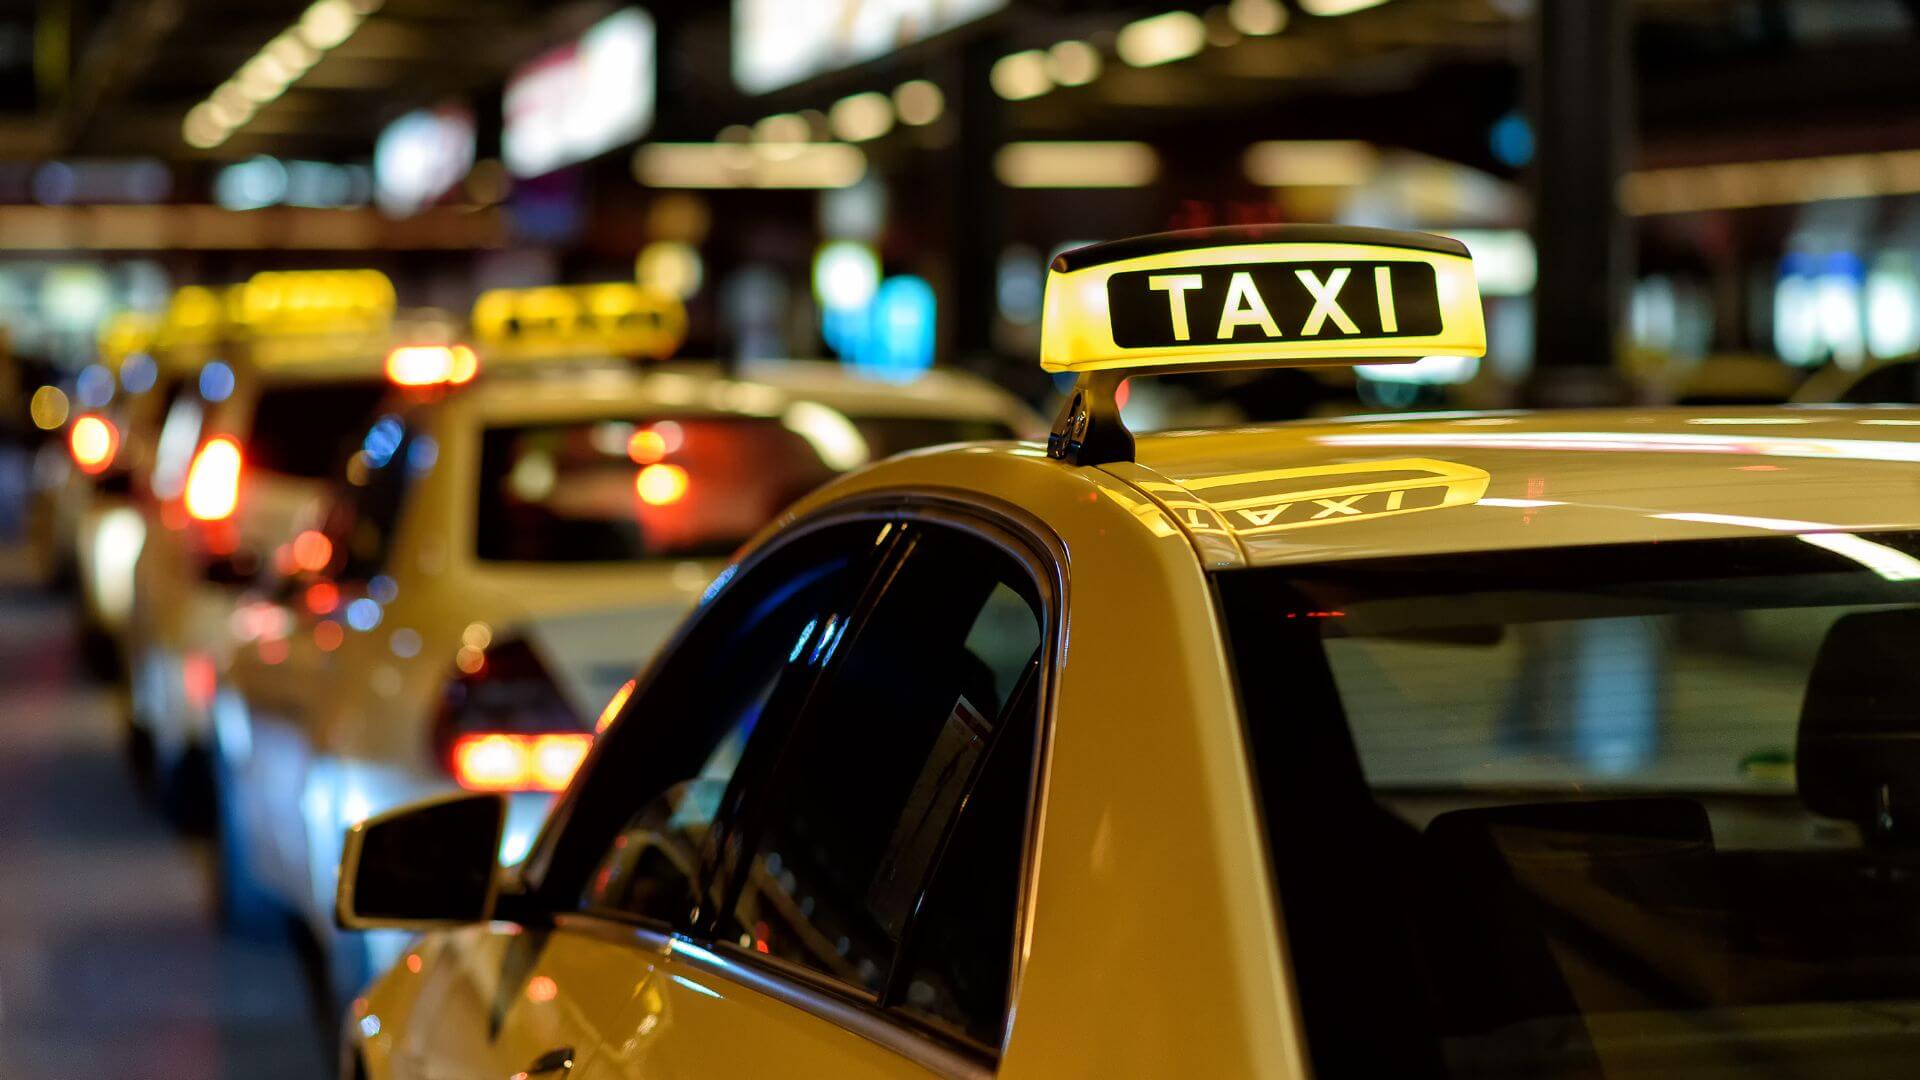 A close up of a taxi at night